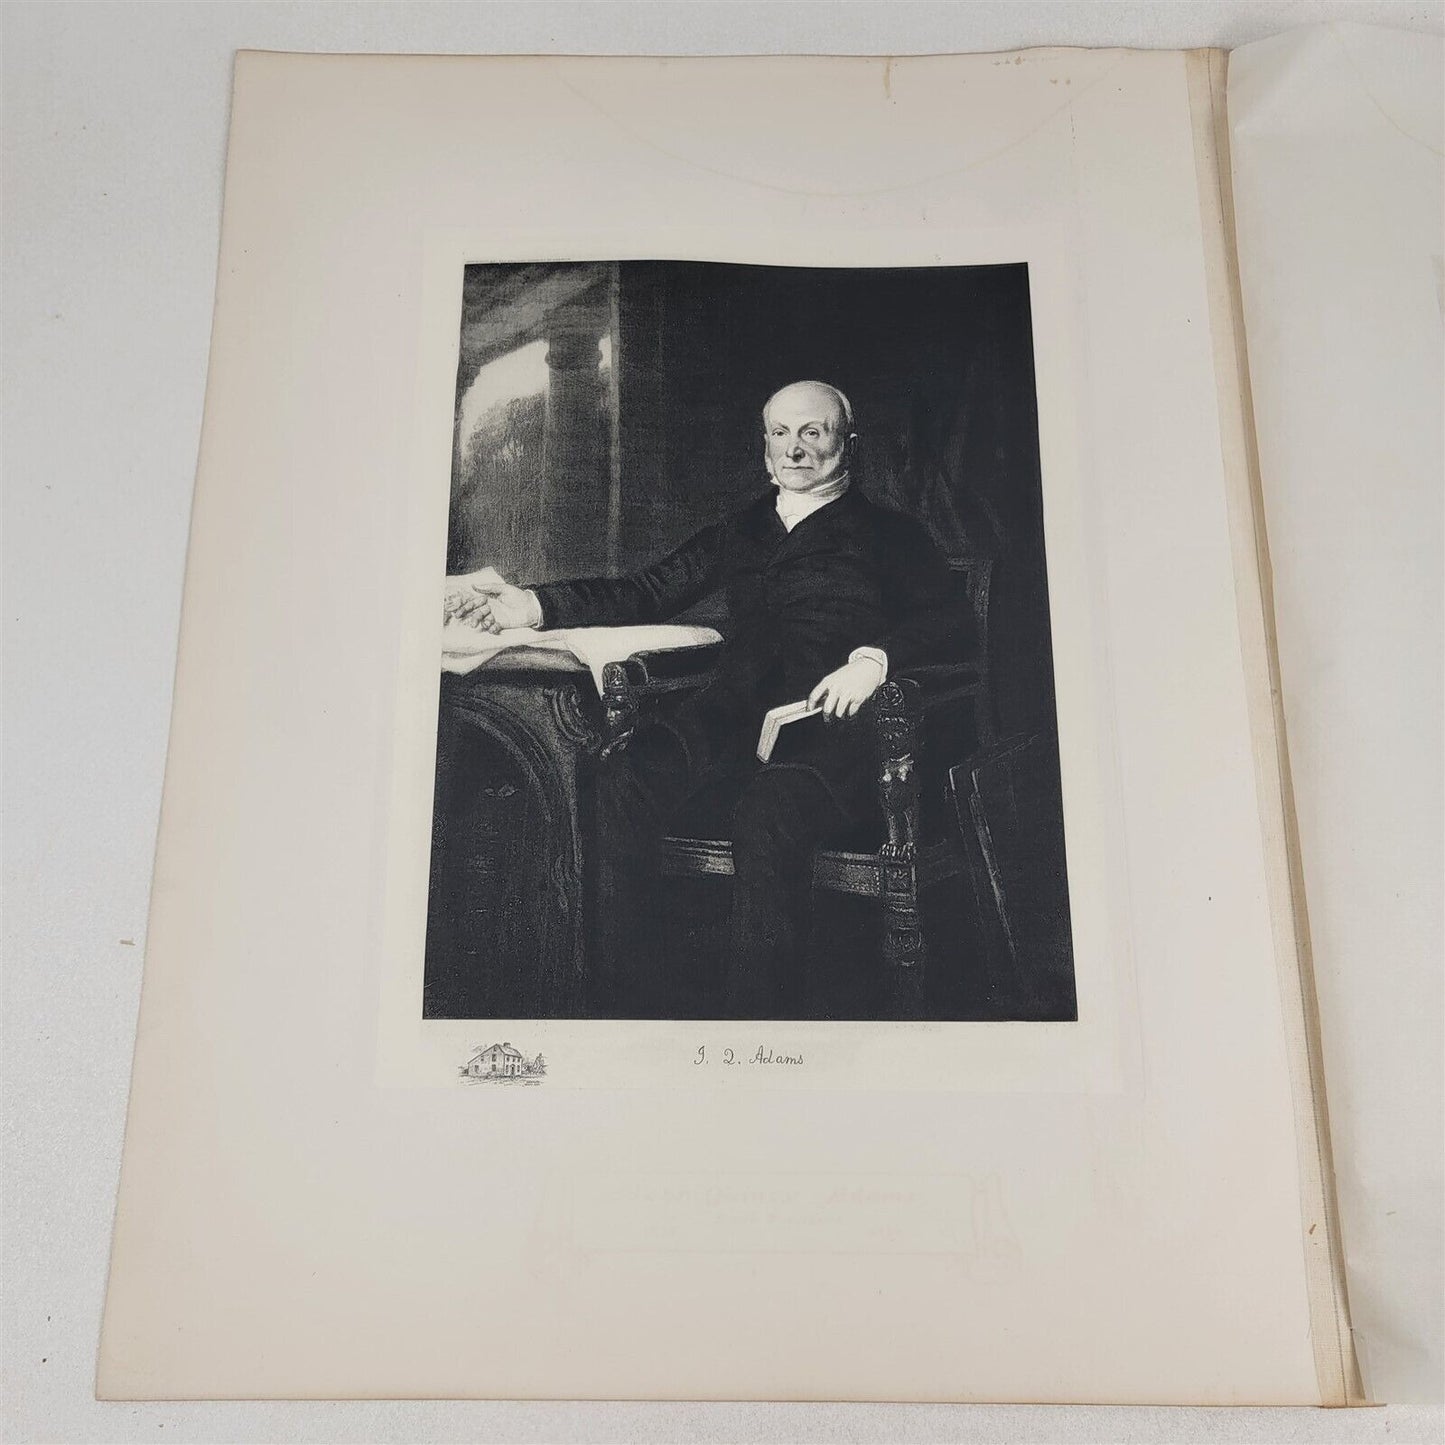 John Quincy Adams 1901 White House Gallery Official Portraits Presidents Gravure